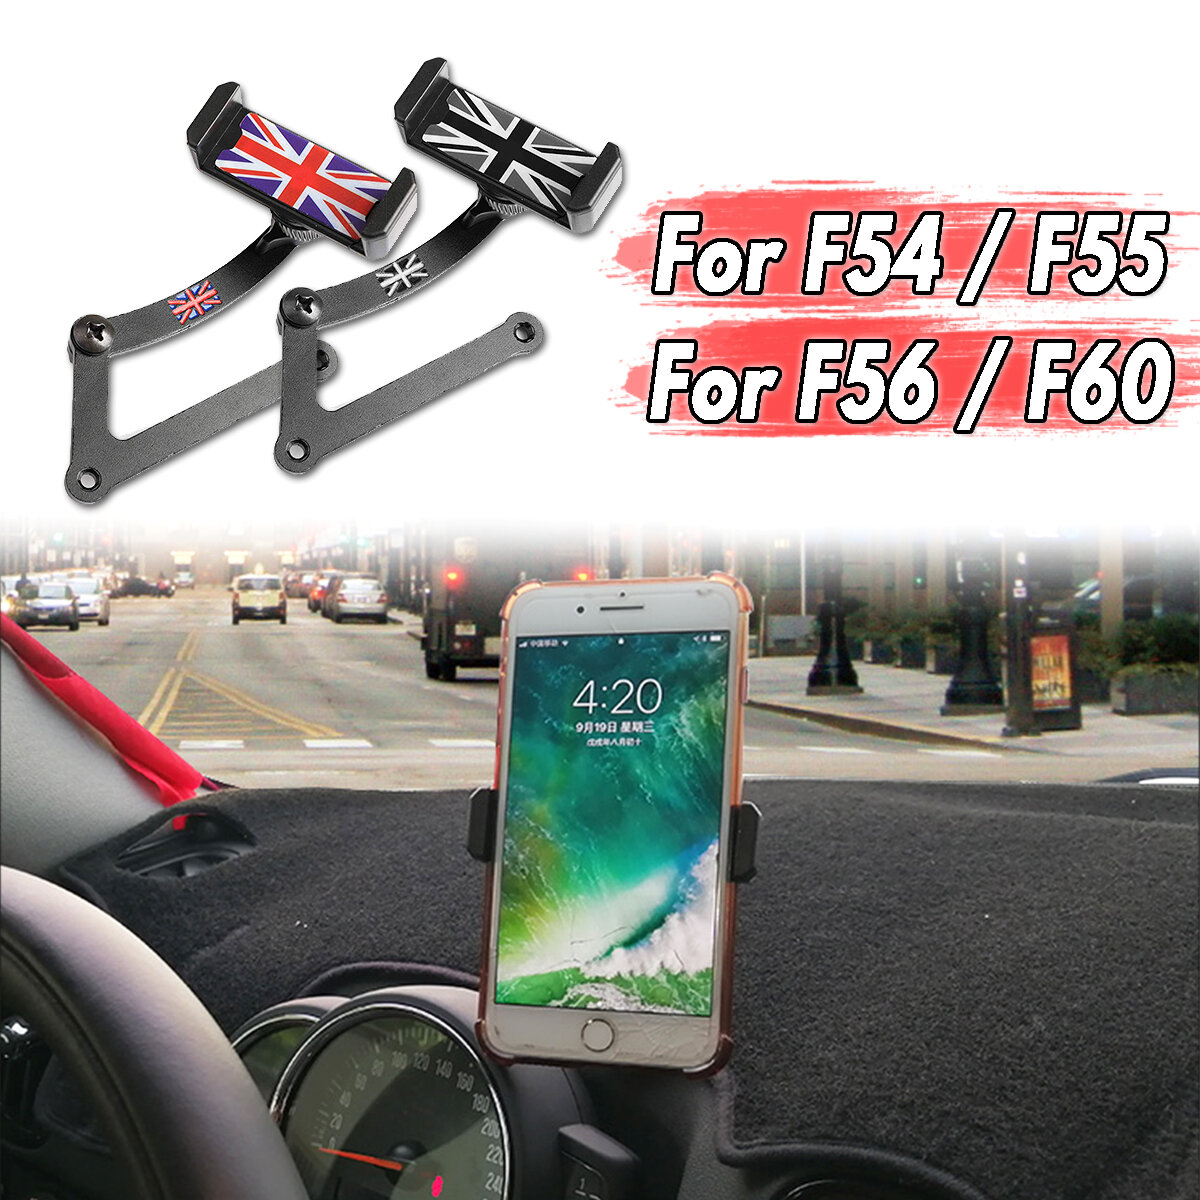 

360° Rotation Car Auto Steering Wheel Phone Holder For BMW Mini Cooper F54 F55 F56 F60 for 3.5-5.5 inch Devices